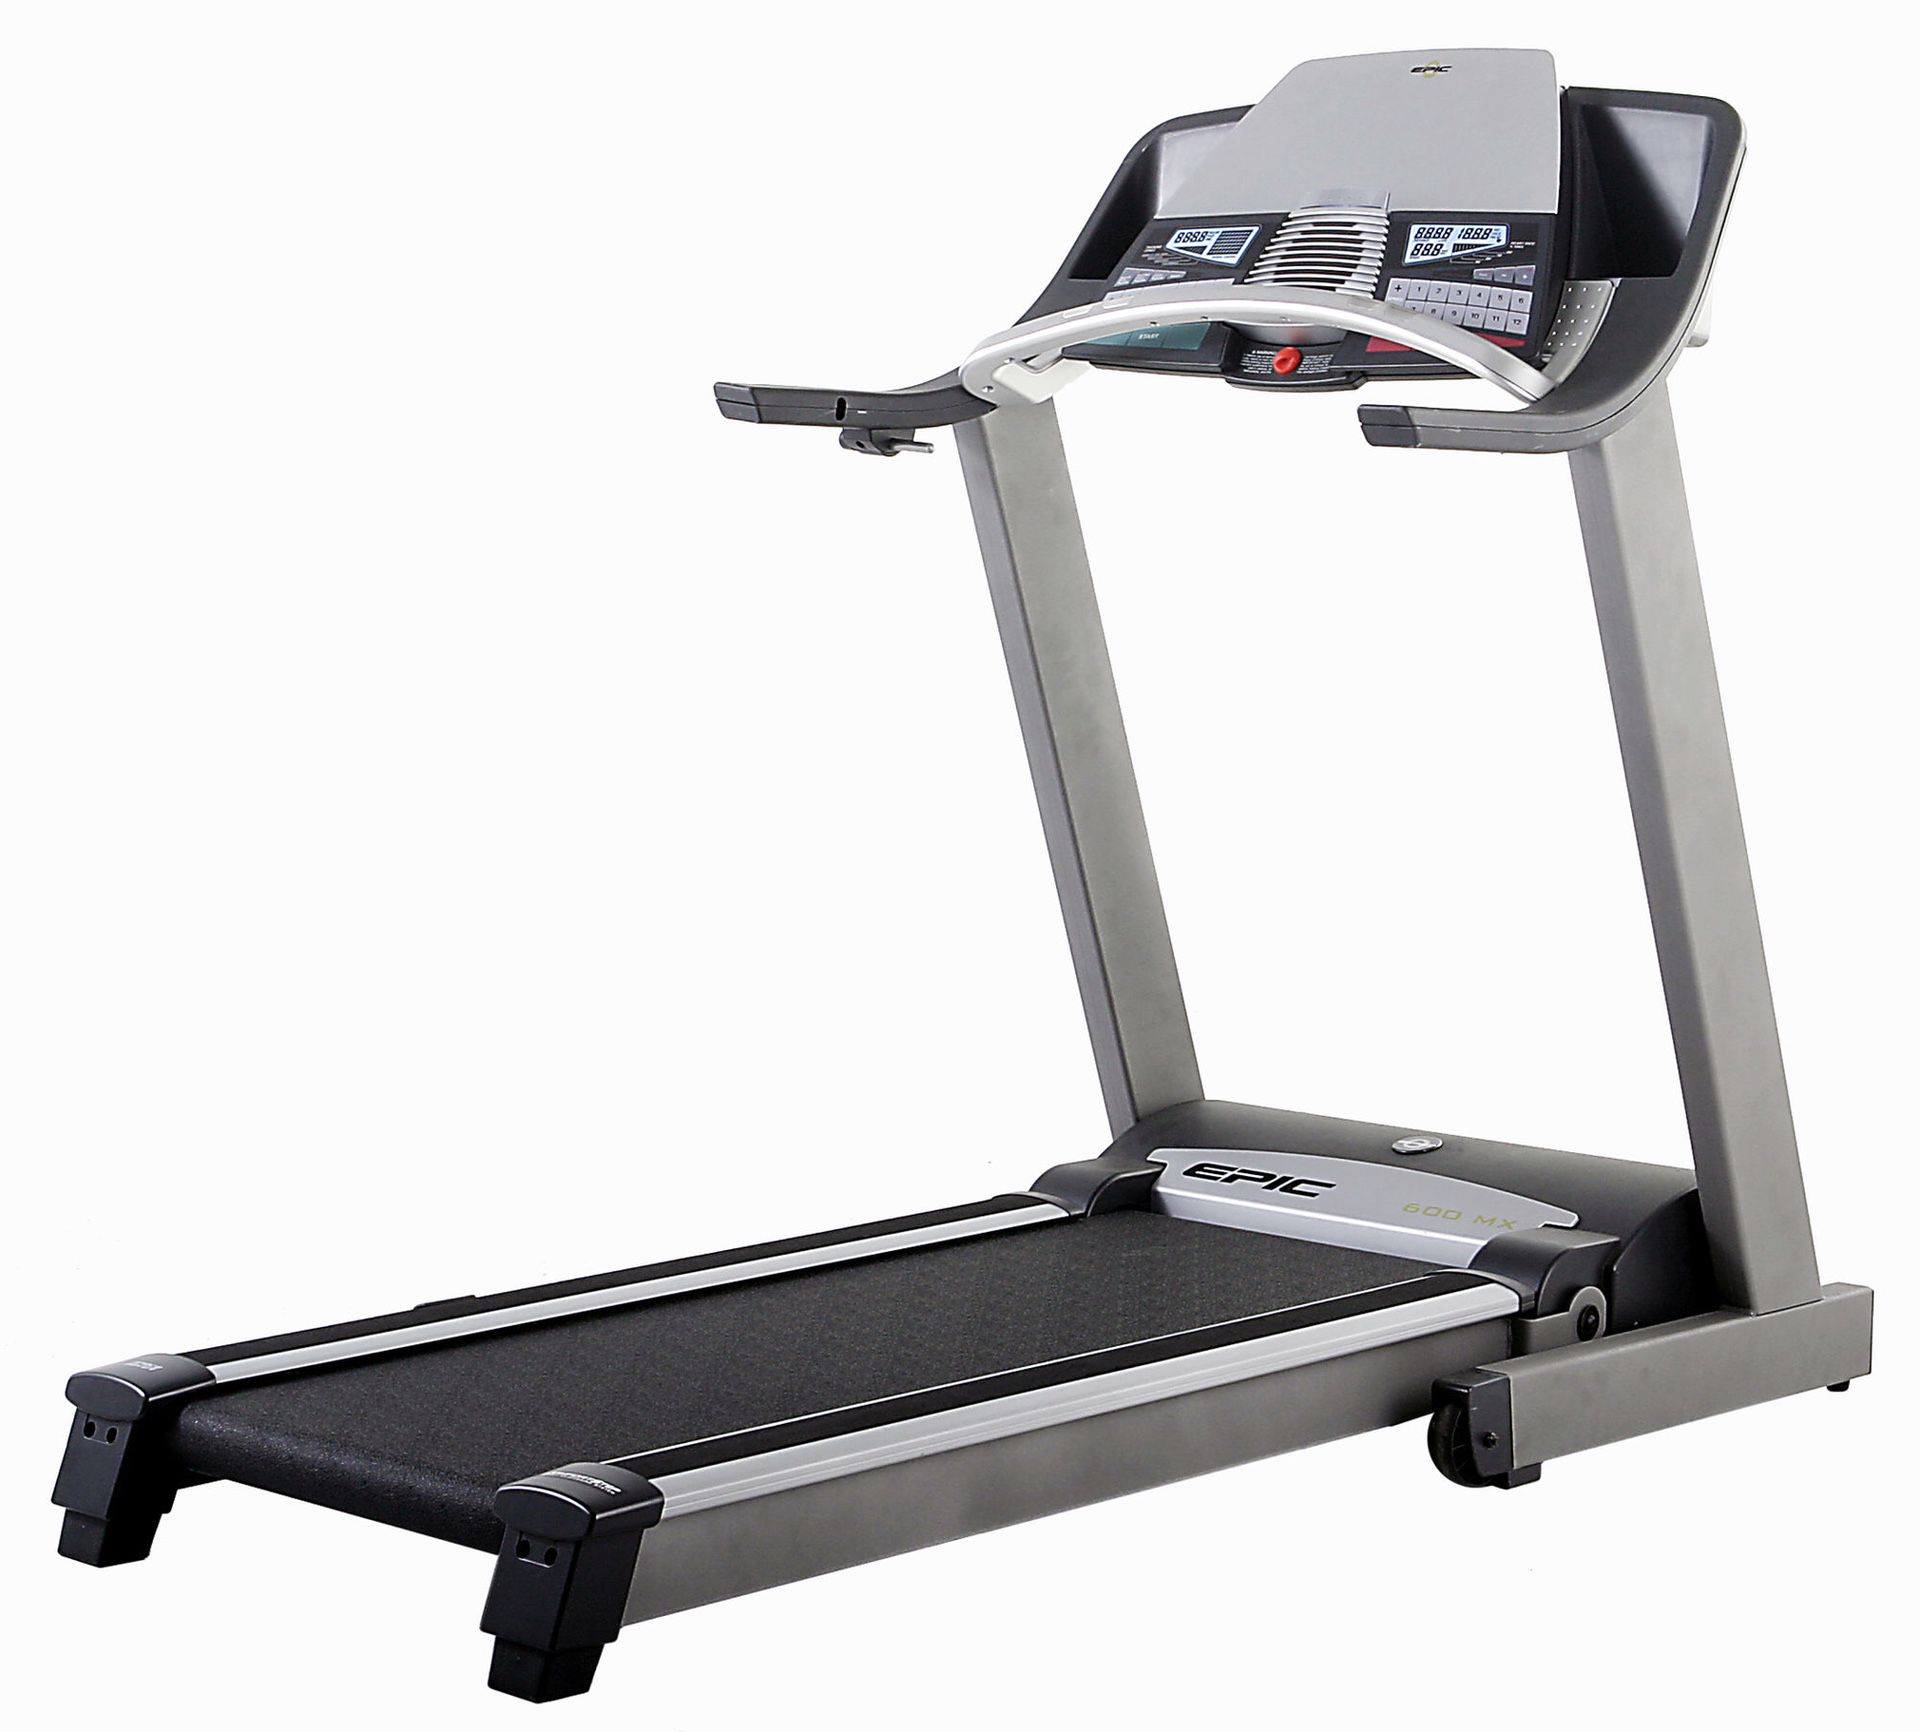 Treadmill very good condition, willing to negotiate the price